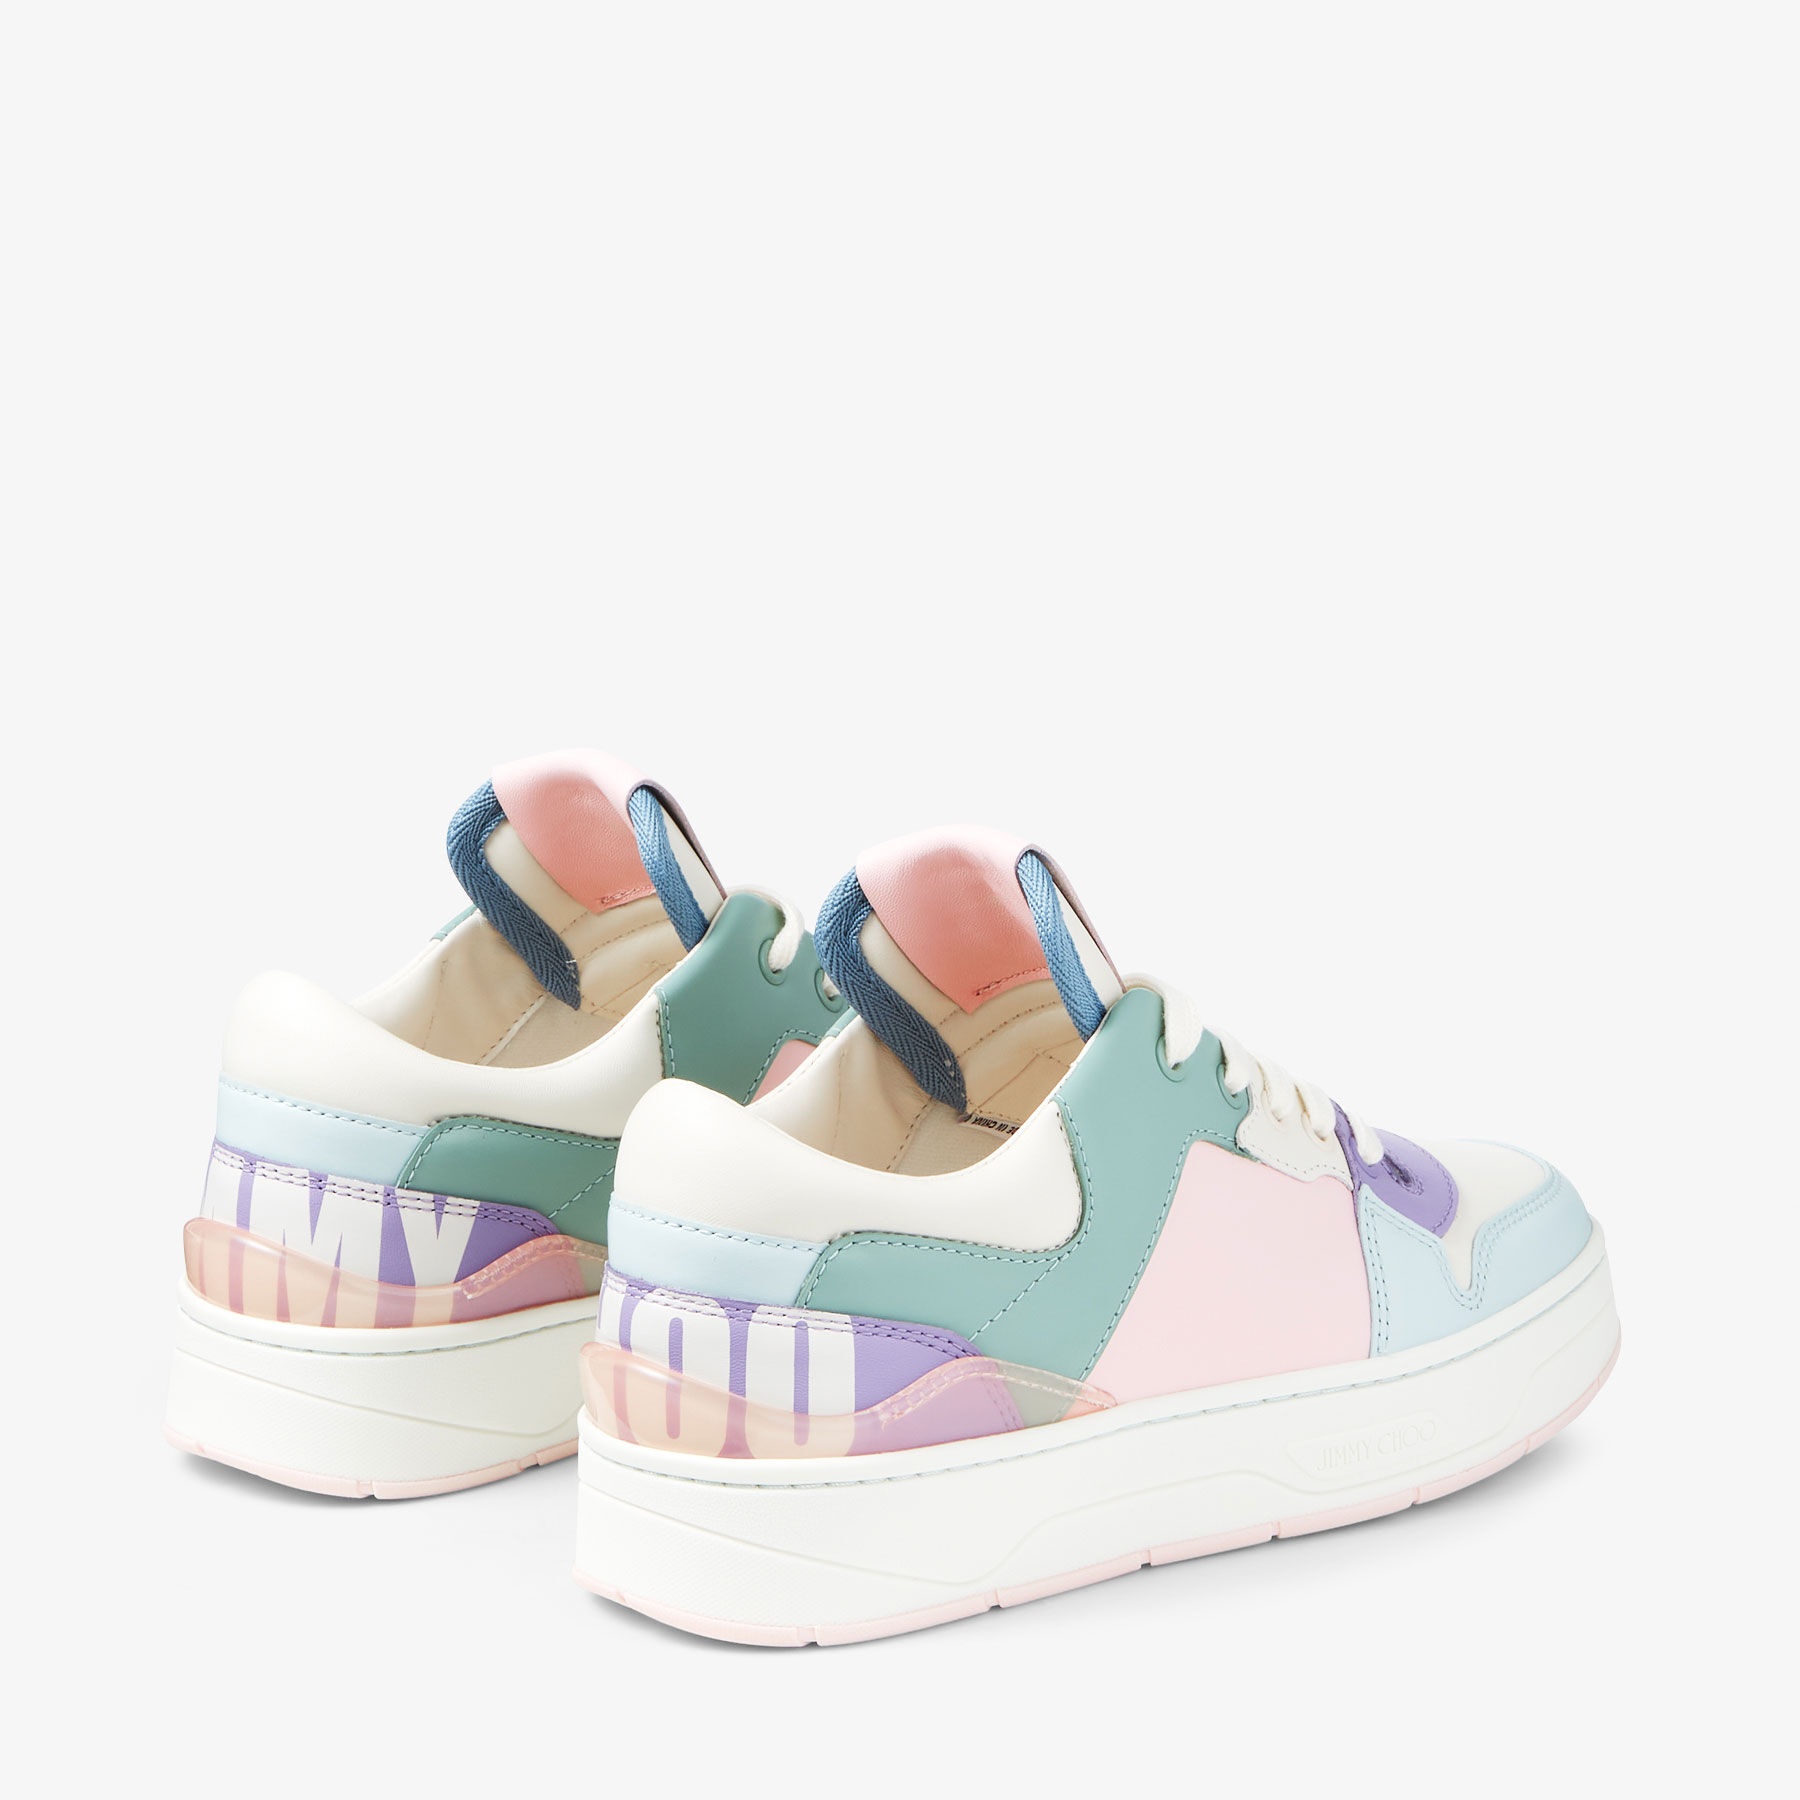 JIMMY CHOO Florent/F Powder Pink and Pastel Mix Leather Trainers